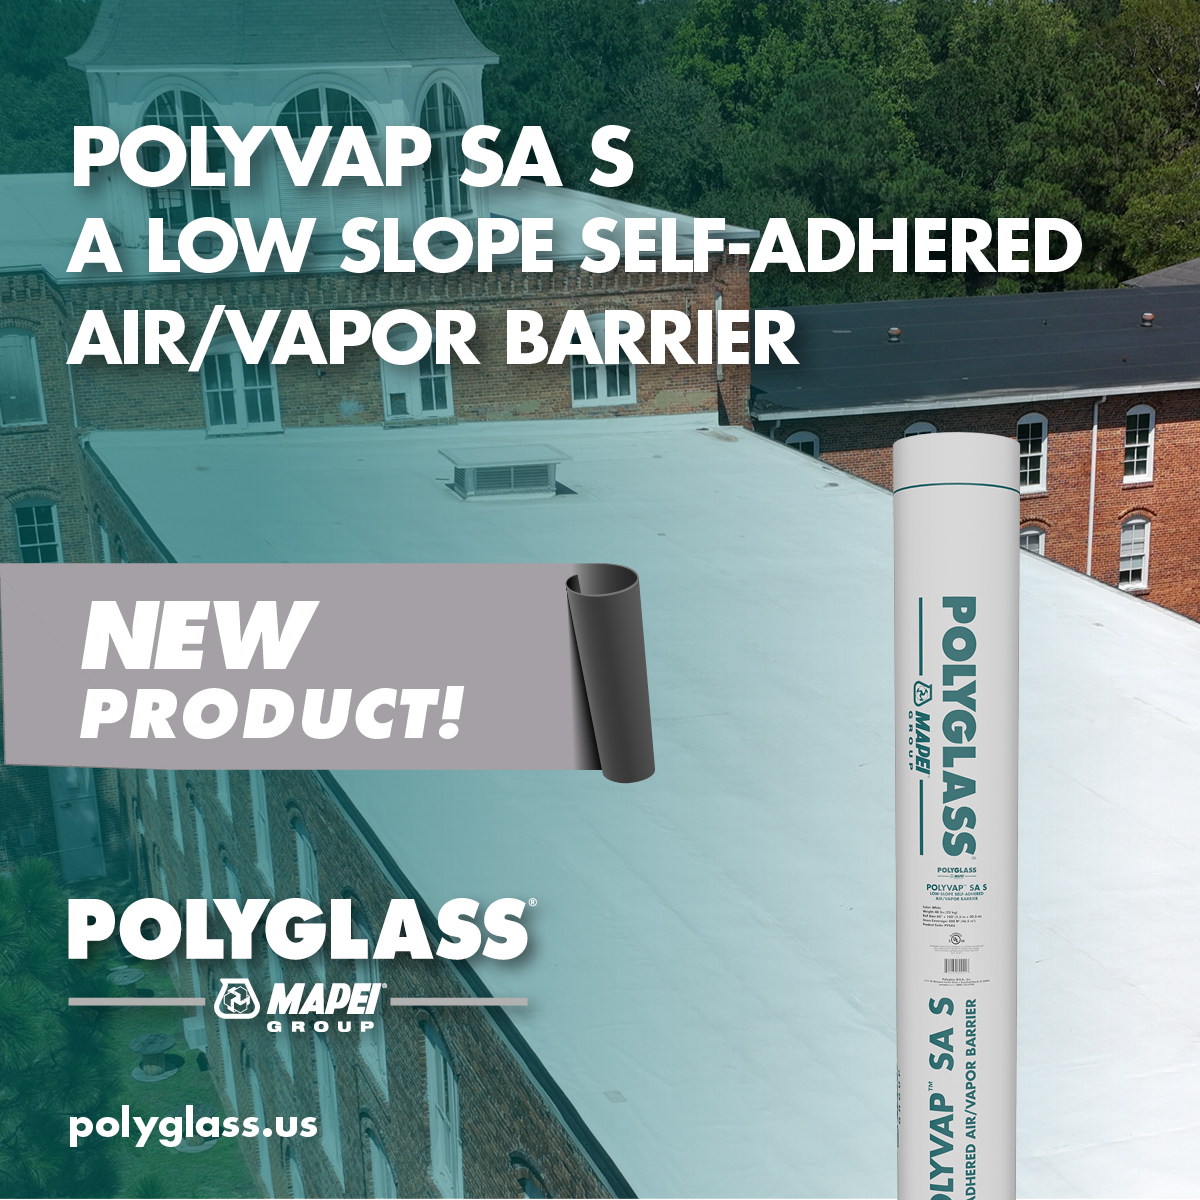 Polyglass Launches PolyVap SA S – A Low Slope Self-Adhered Air/Vapor ...